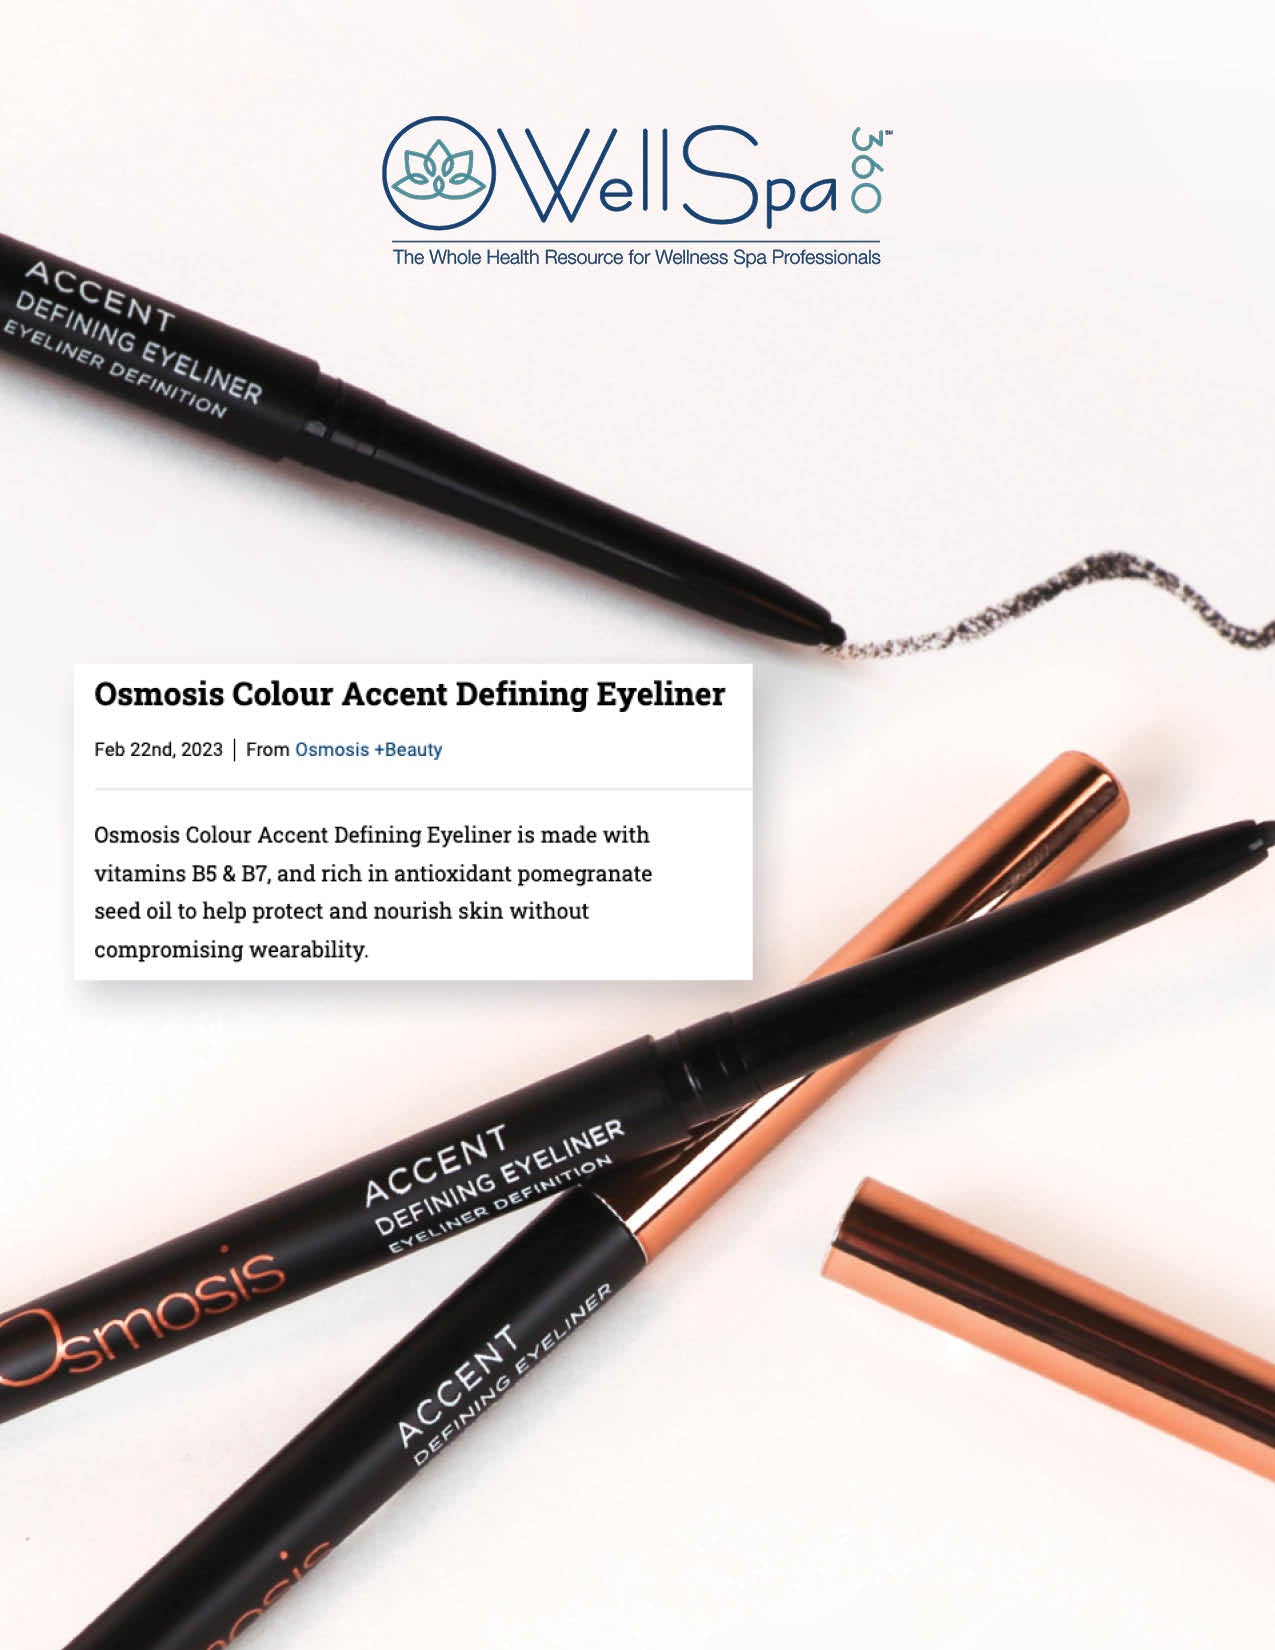 WellSpa 360 featured the Osmosis Accent Defining Eyeliner